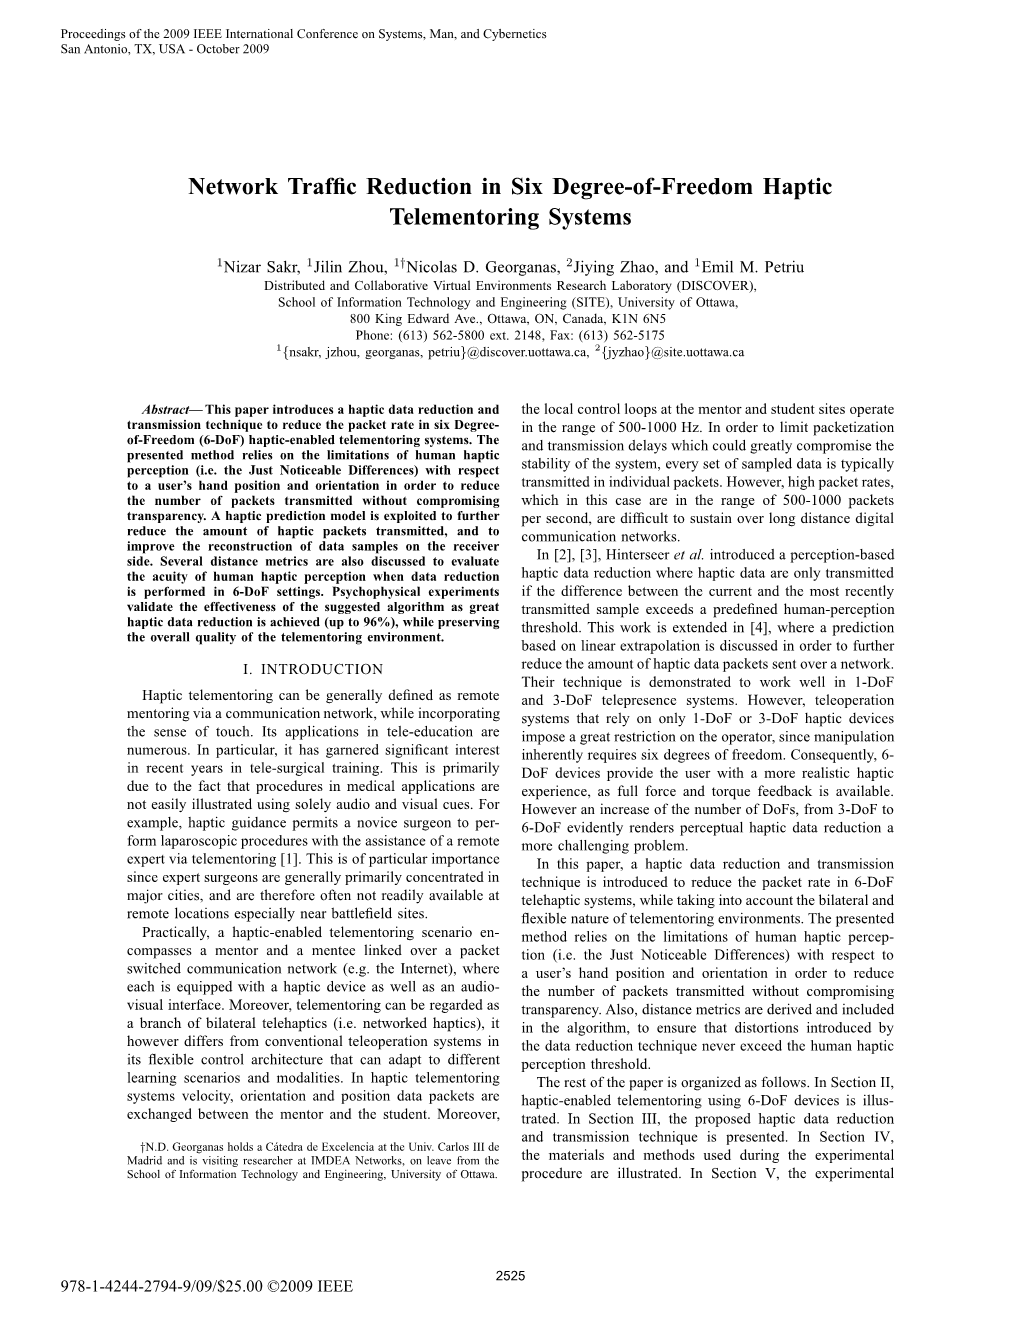 Network Traffic Reduction in Six Degree-Of-Freedom Haptic